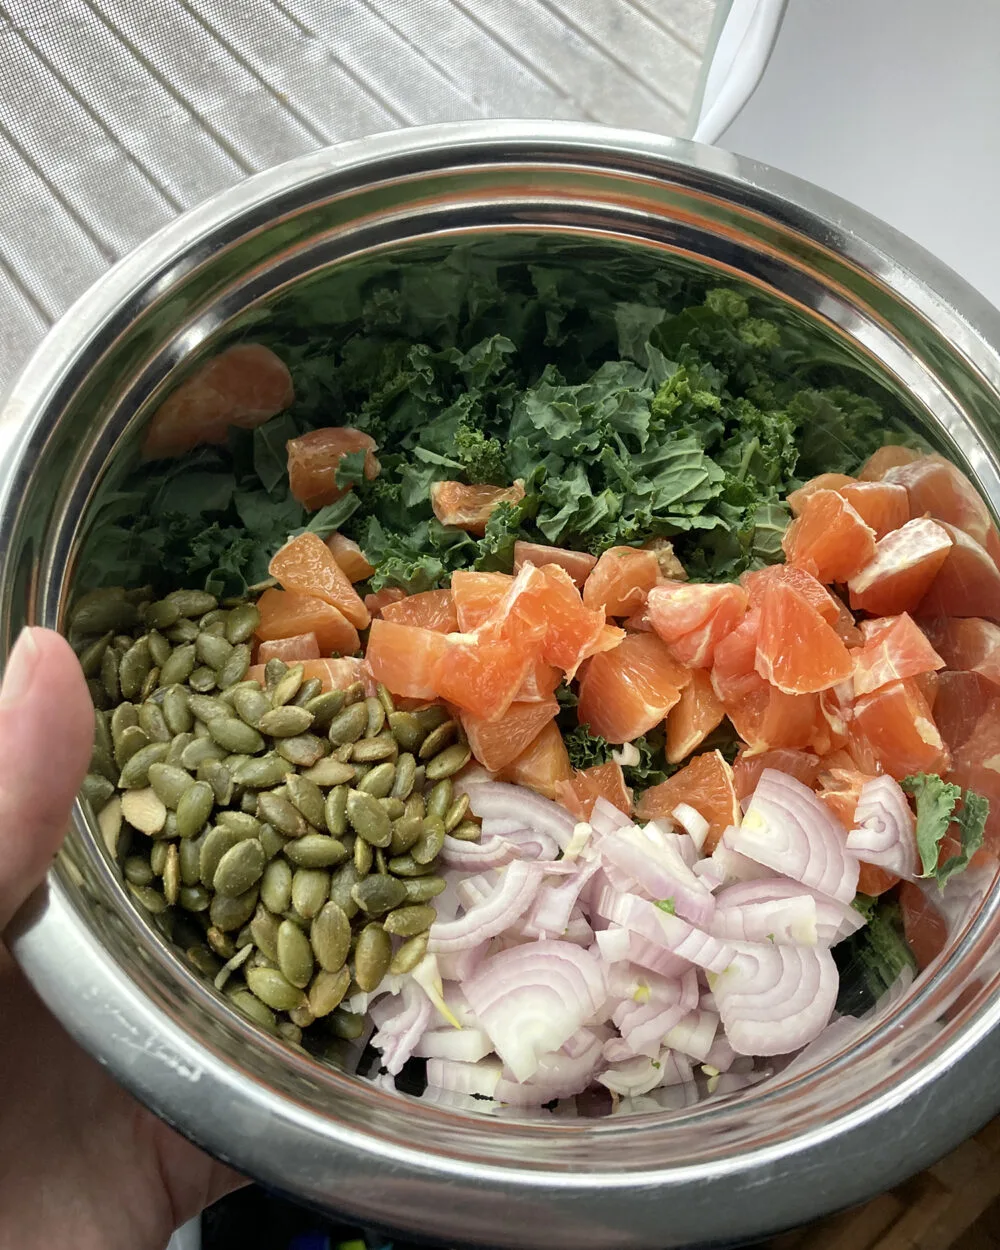 A metal mixing bowl with chopped shallots, pepitas, chopped kale and chopped cara cara oranges is shown.